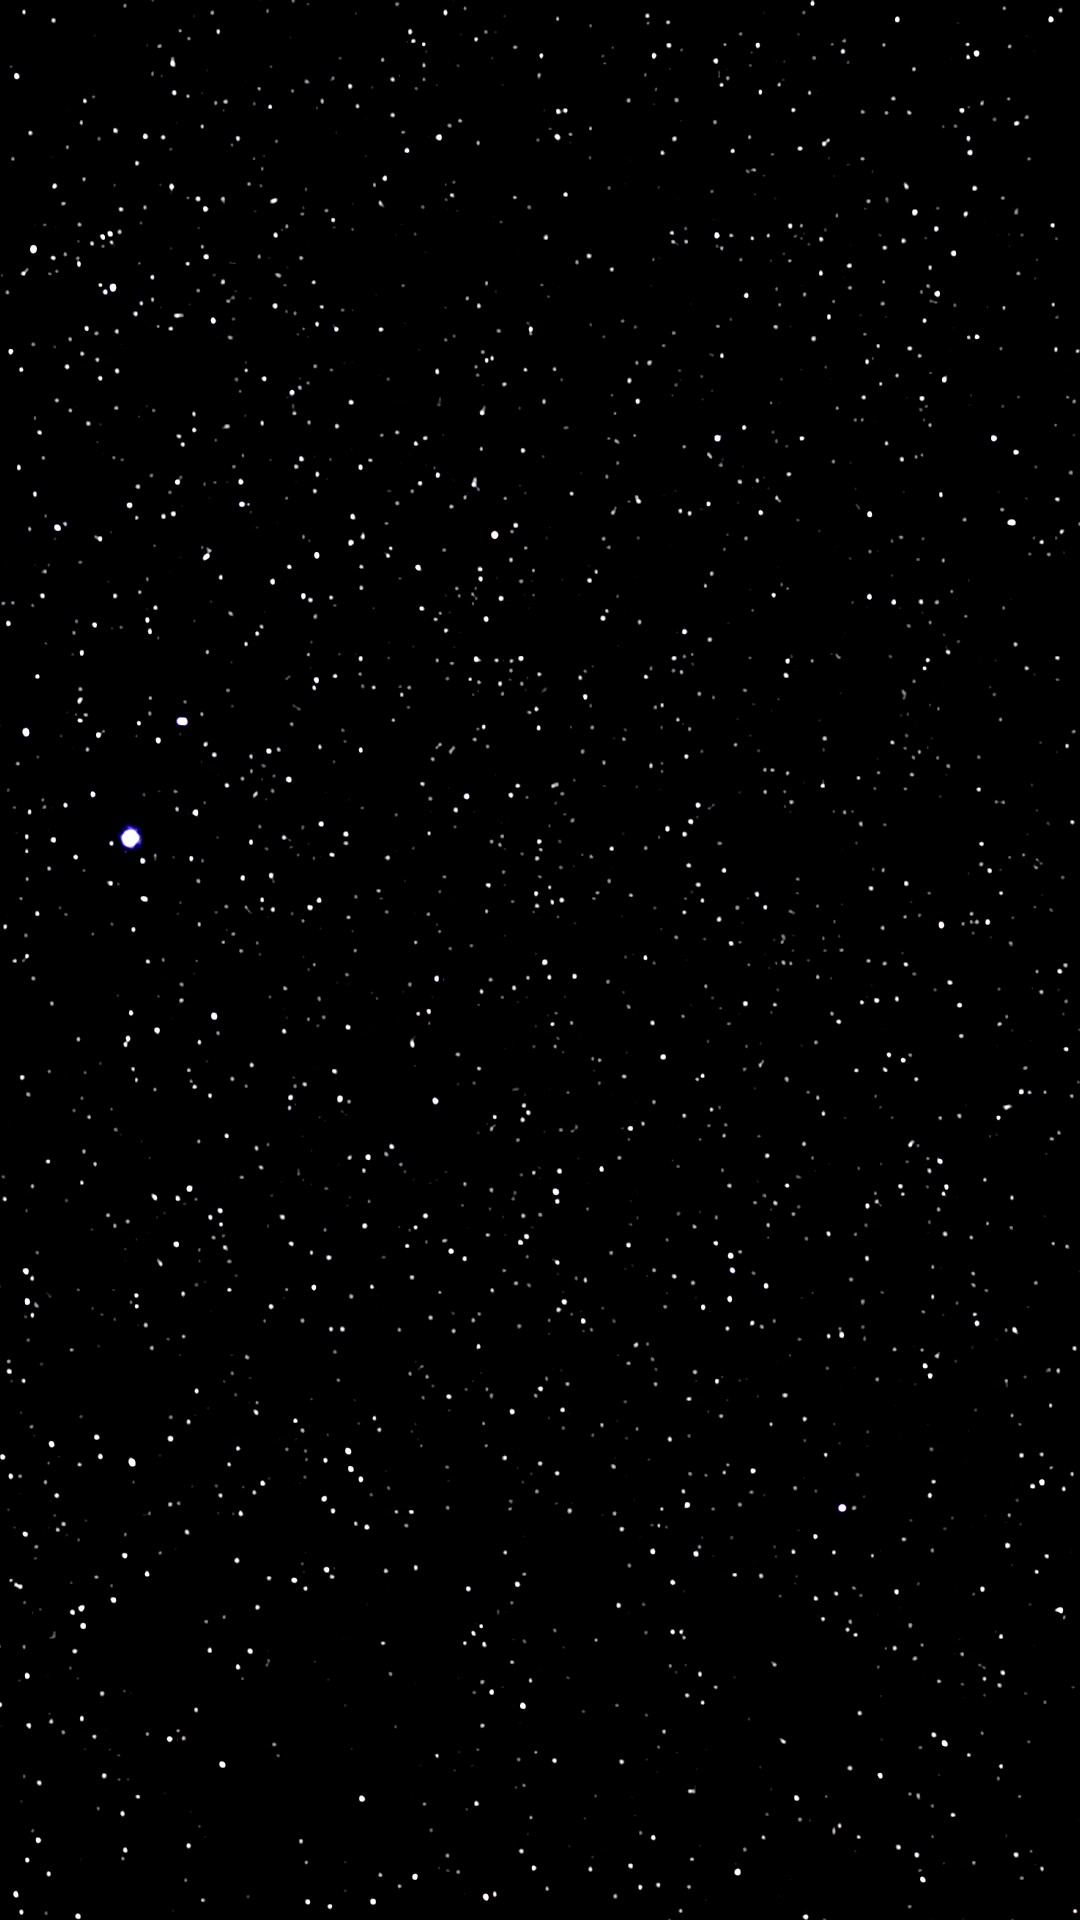 Wallpaper Stars Aesthetic for iPhone With high-resolution 1080X1920 pixel. You can use this wallpaper for your iPhone 5, 6, 7, 8, X, XS, XR backgrounds, Mobile Screensaver, or iPad Lock Screen